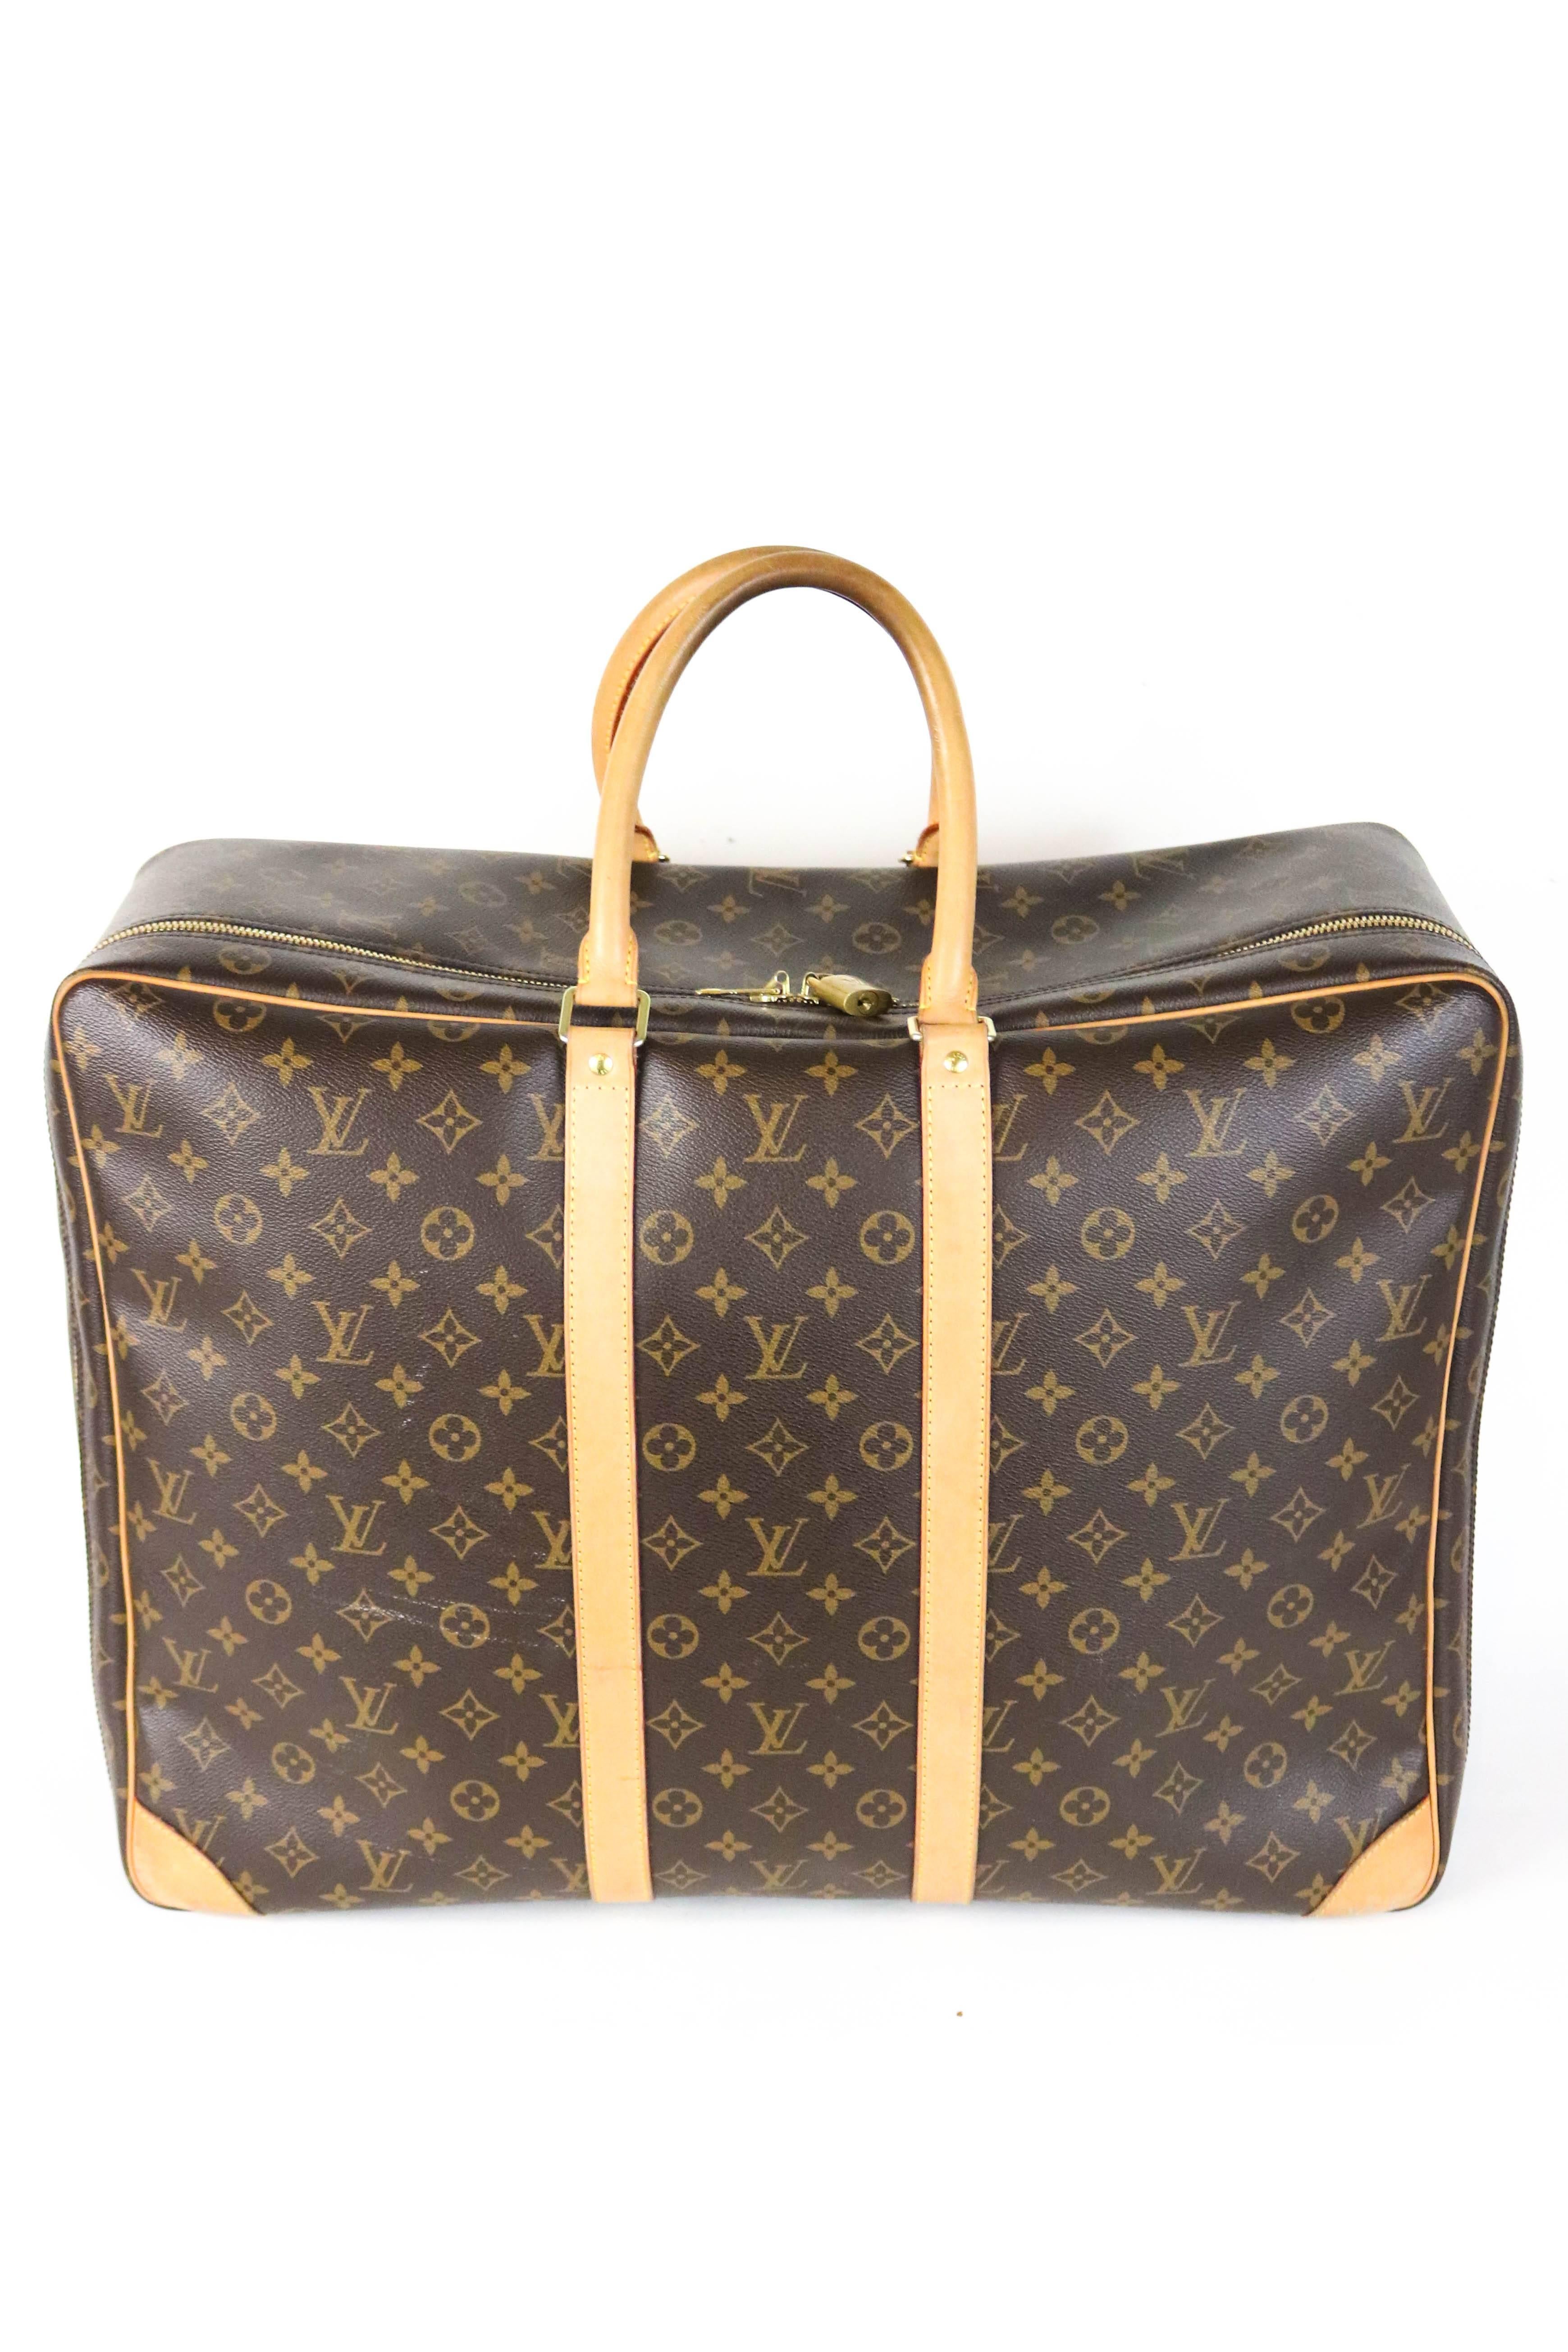 Louis Vuitton Monogram Canvas Sirius 55 Soft Sided Travel Case  In Good Condition For Sale In San Francisco, CA